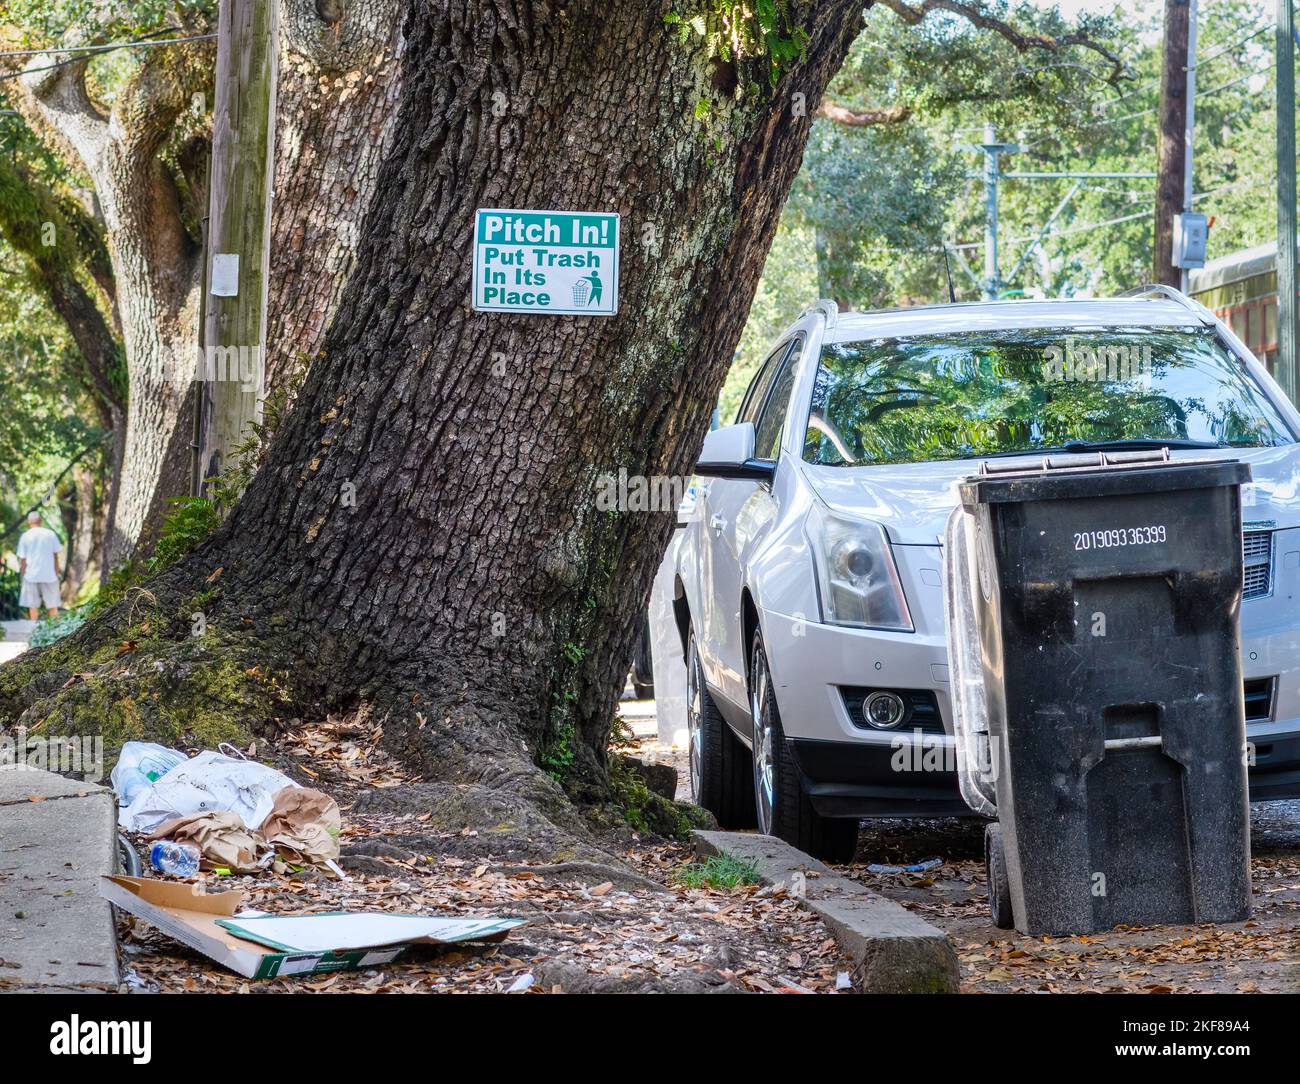 NEW ORLEANS, LA, USA - NOVEMBER 9, 2022: 'Pitch In! Put Trash in its Place' sign, litter along the sidewalk and trash cart in the street Stock Photo